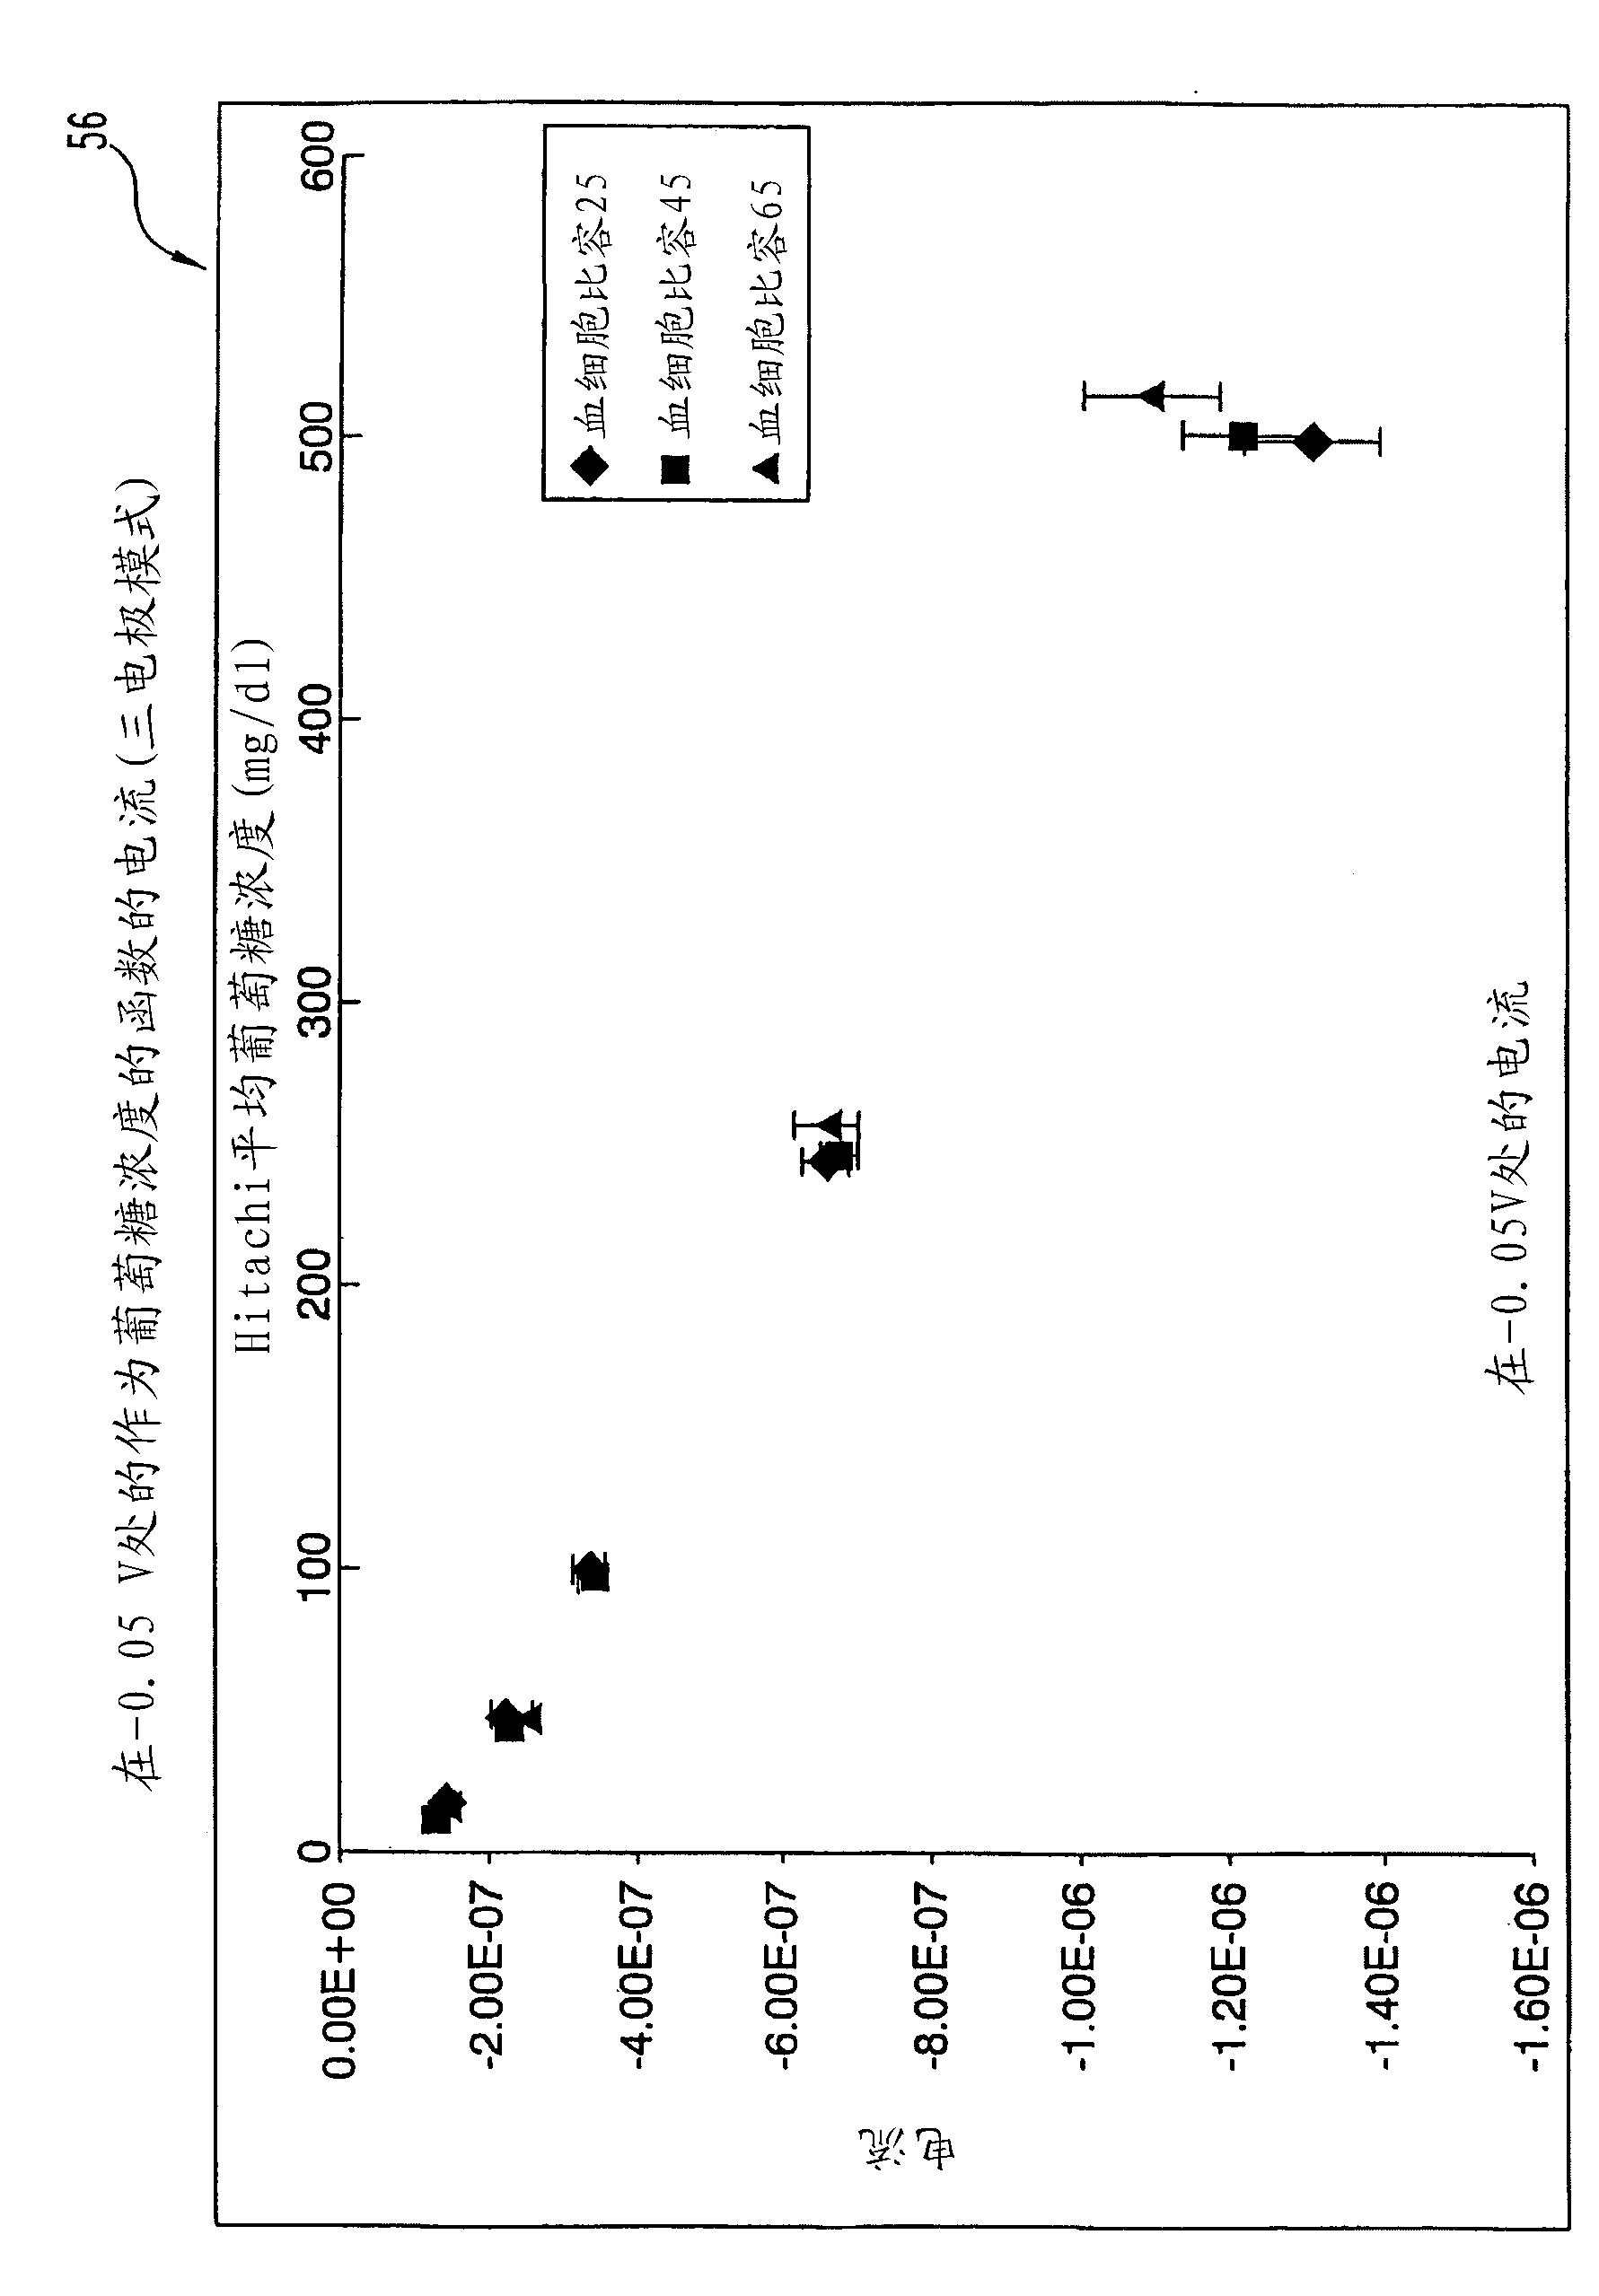 Method for measuring analyte concentration in a liquid sample